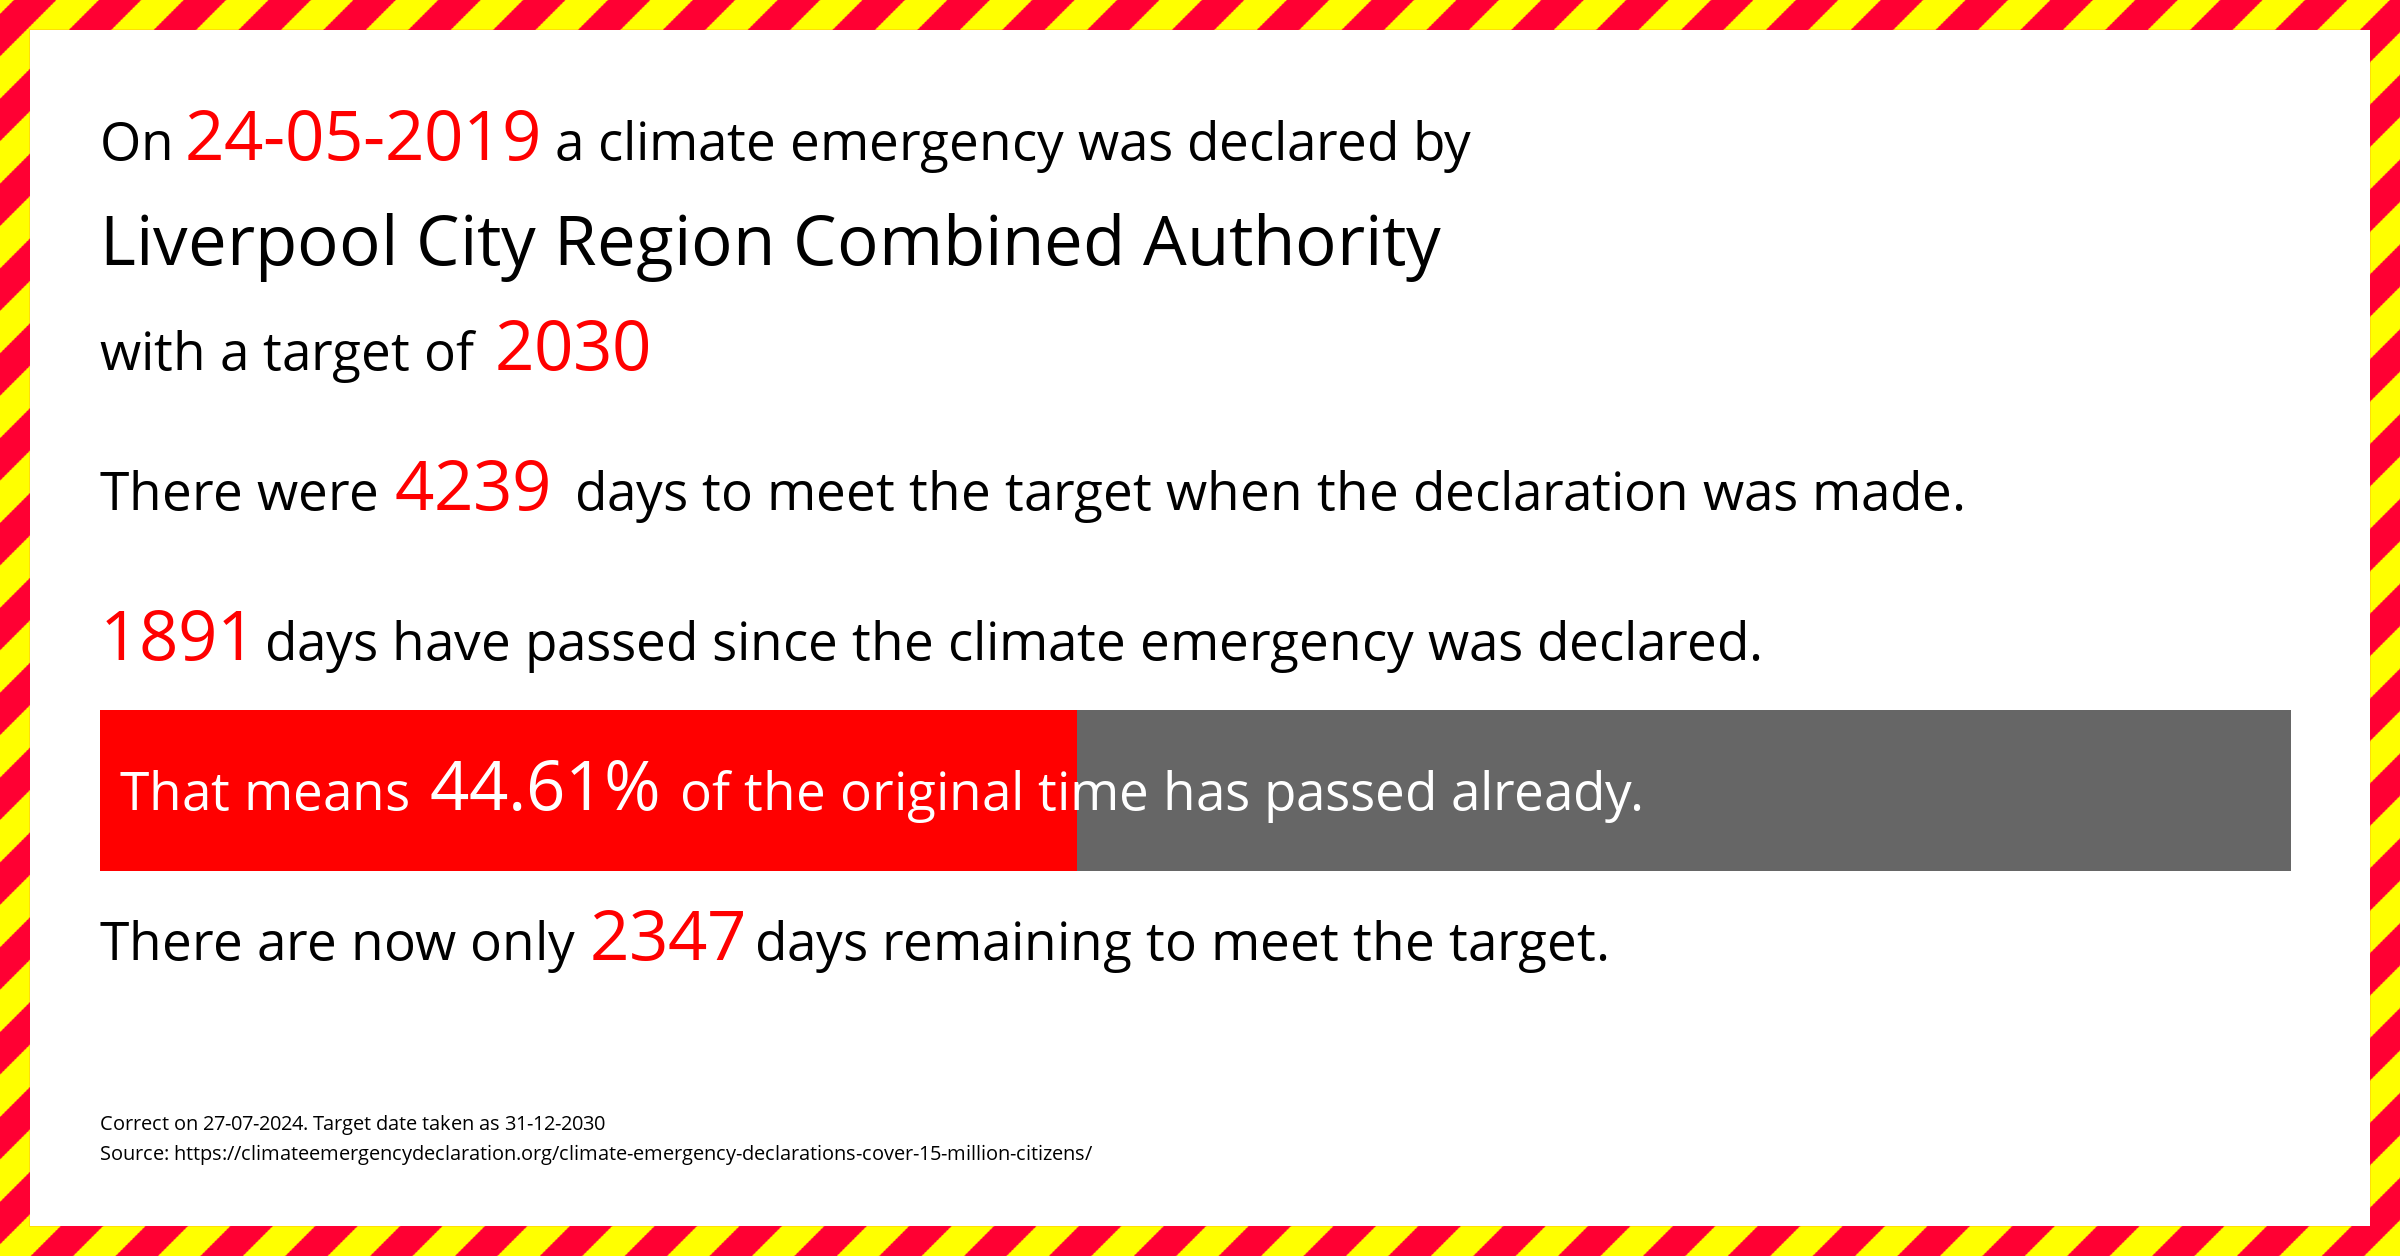 Liverpool City Region Combined Authority declared a Climate emergency on Friday 24th May 2019, with a target of 2030.